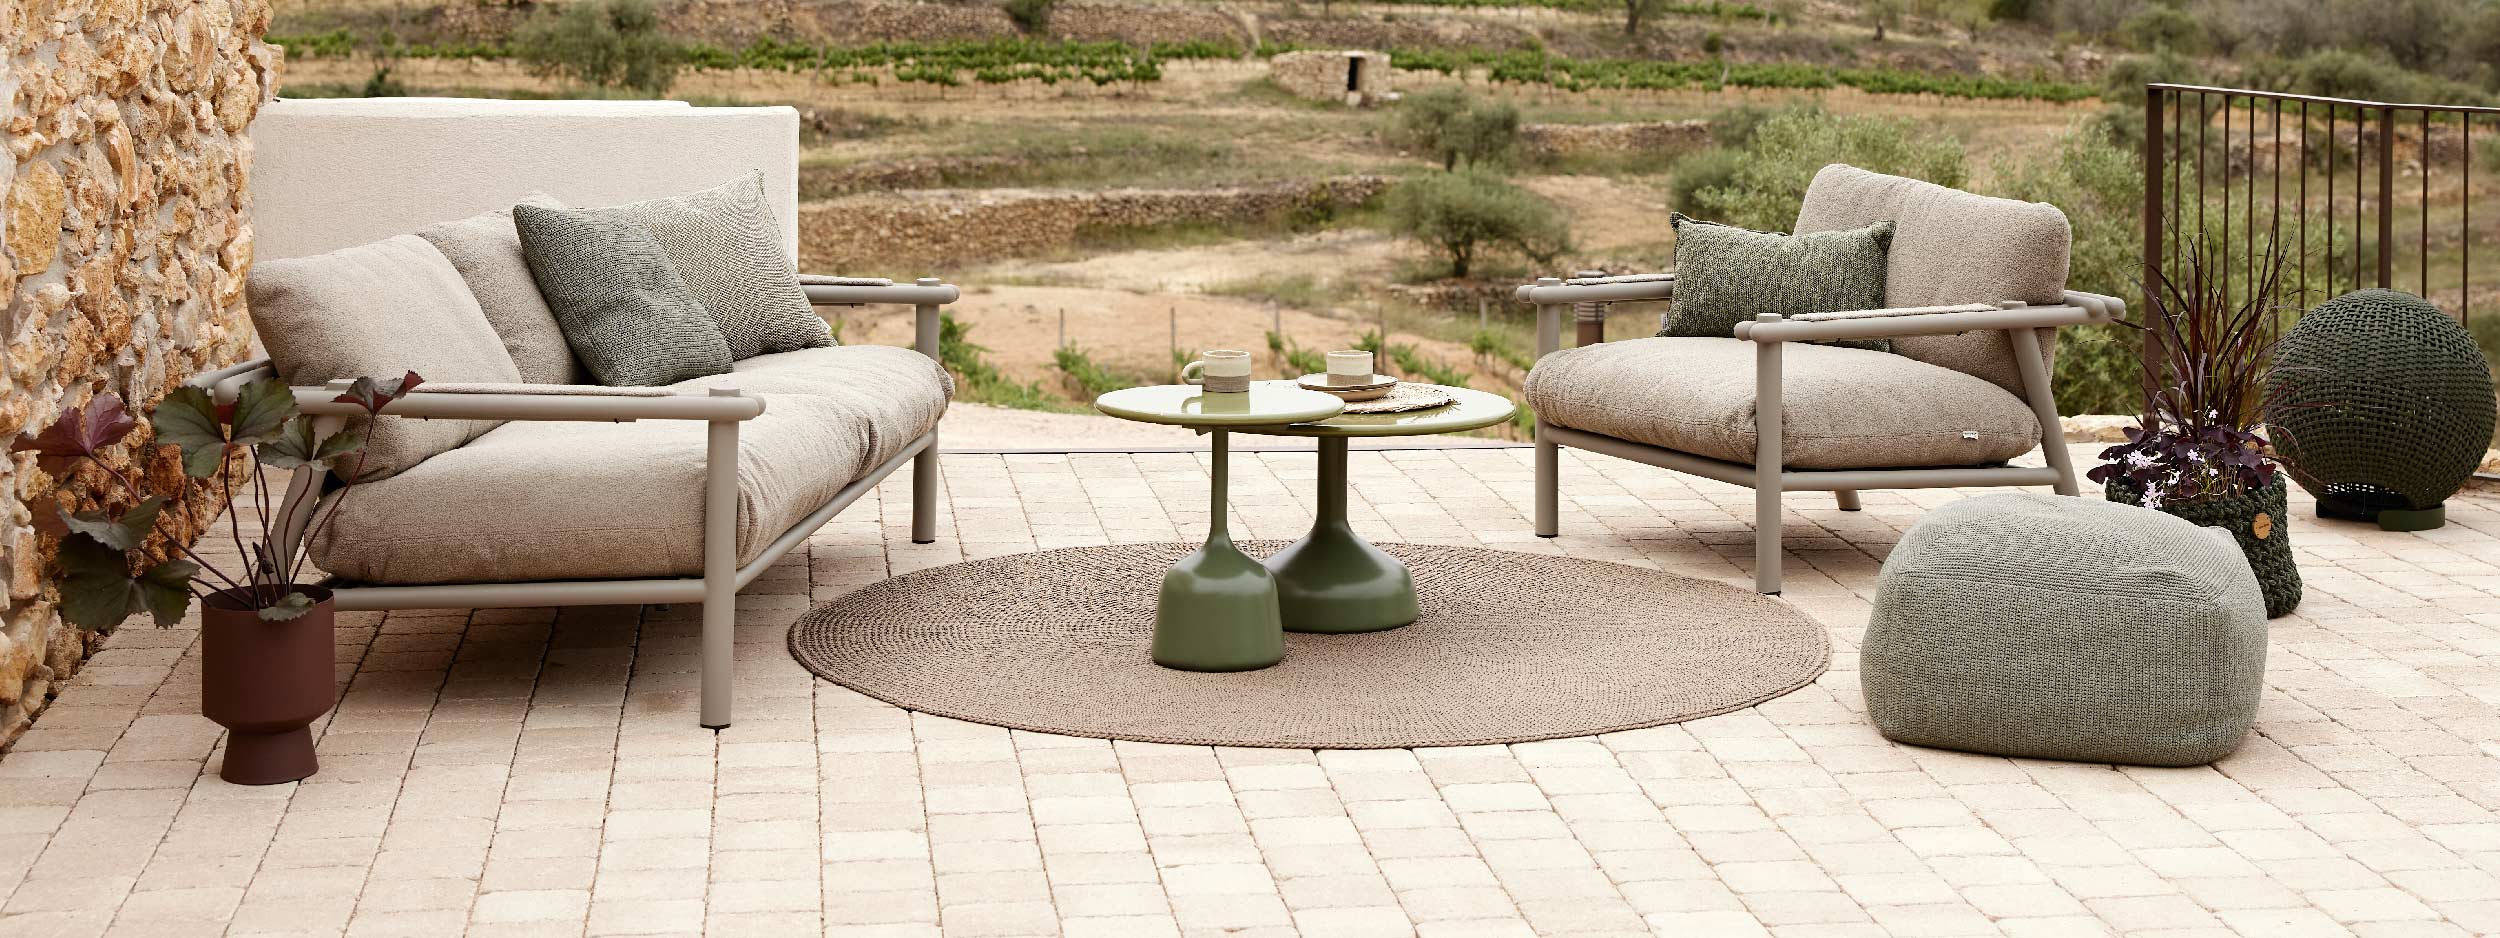 Image of Stick outdoor lounge furniture, with Knit outdoor rug and Glaze low tables in the centre